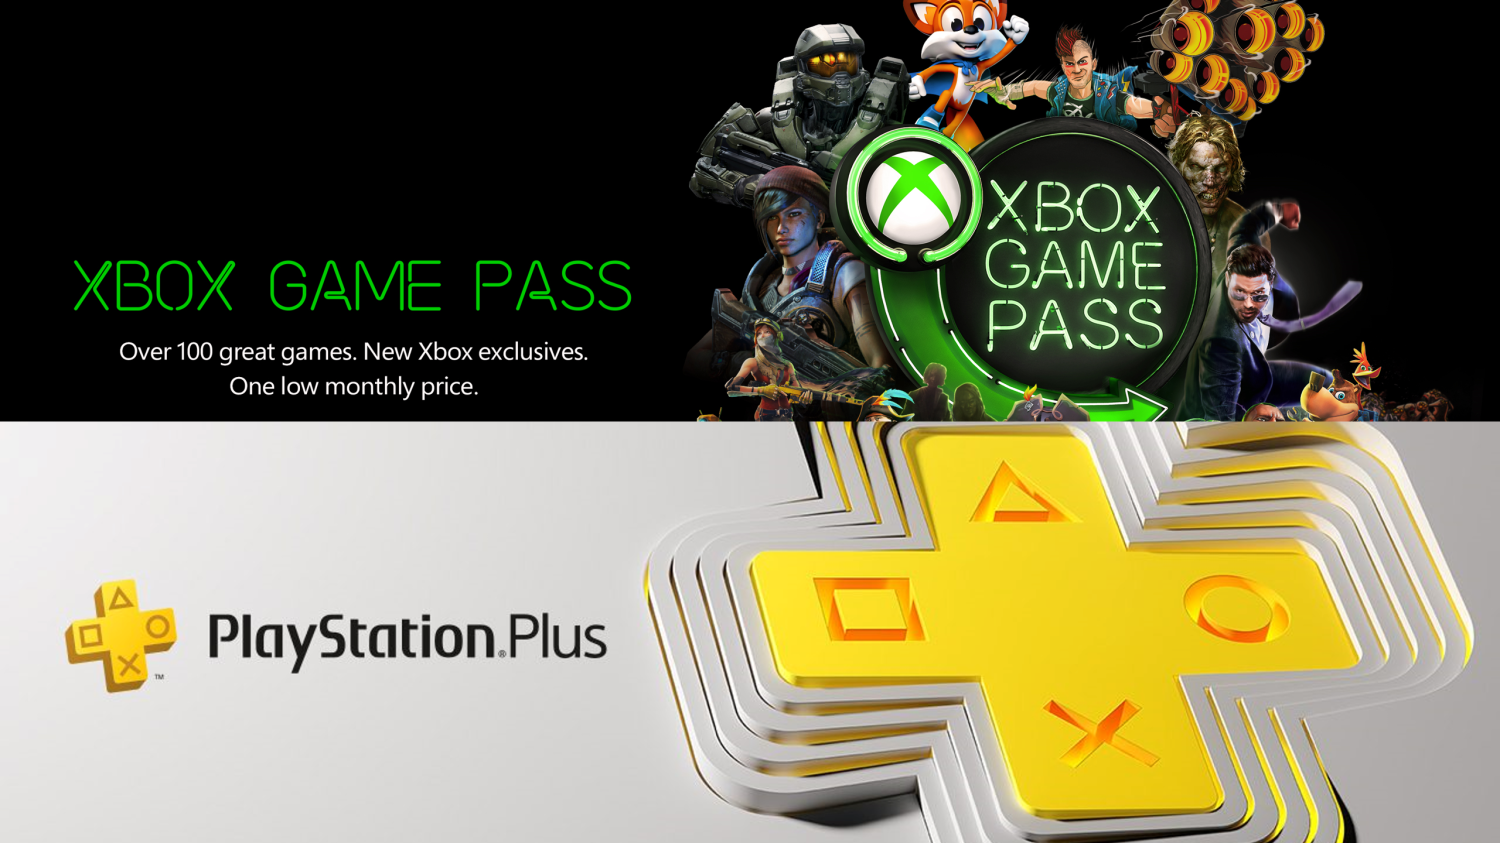 Buy your PC / Xbox games and Xbox / PlayStation Plus subscriptions